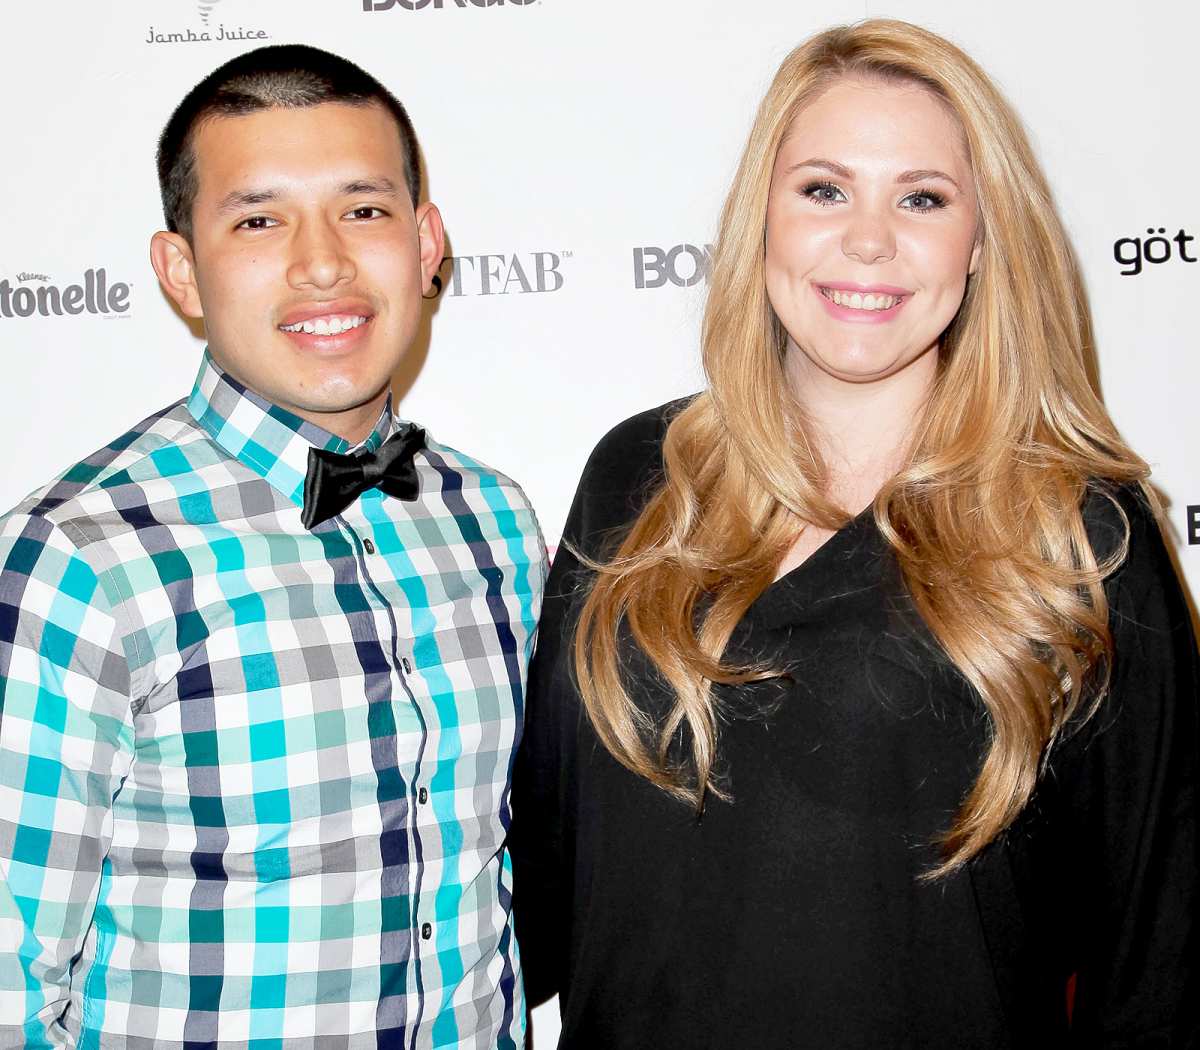 Kailyn Lowry and Javi Marroquin Talk Getting Back Together